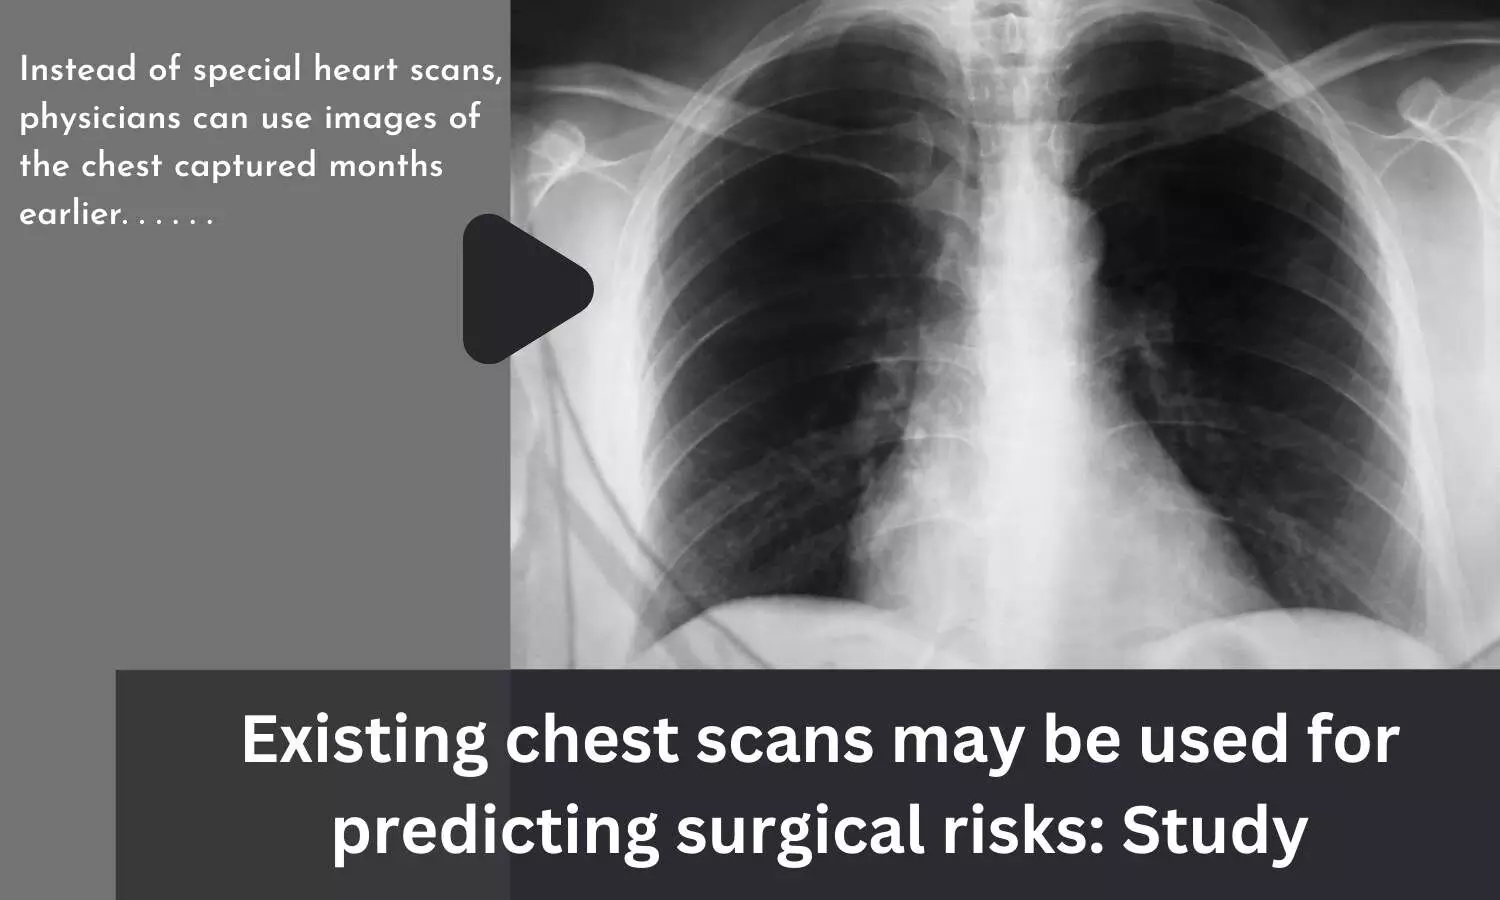 Existing chest scans may be used for predicting surgical risks: Study